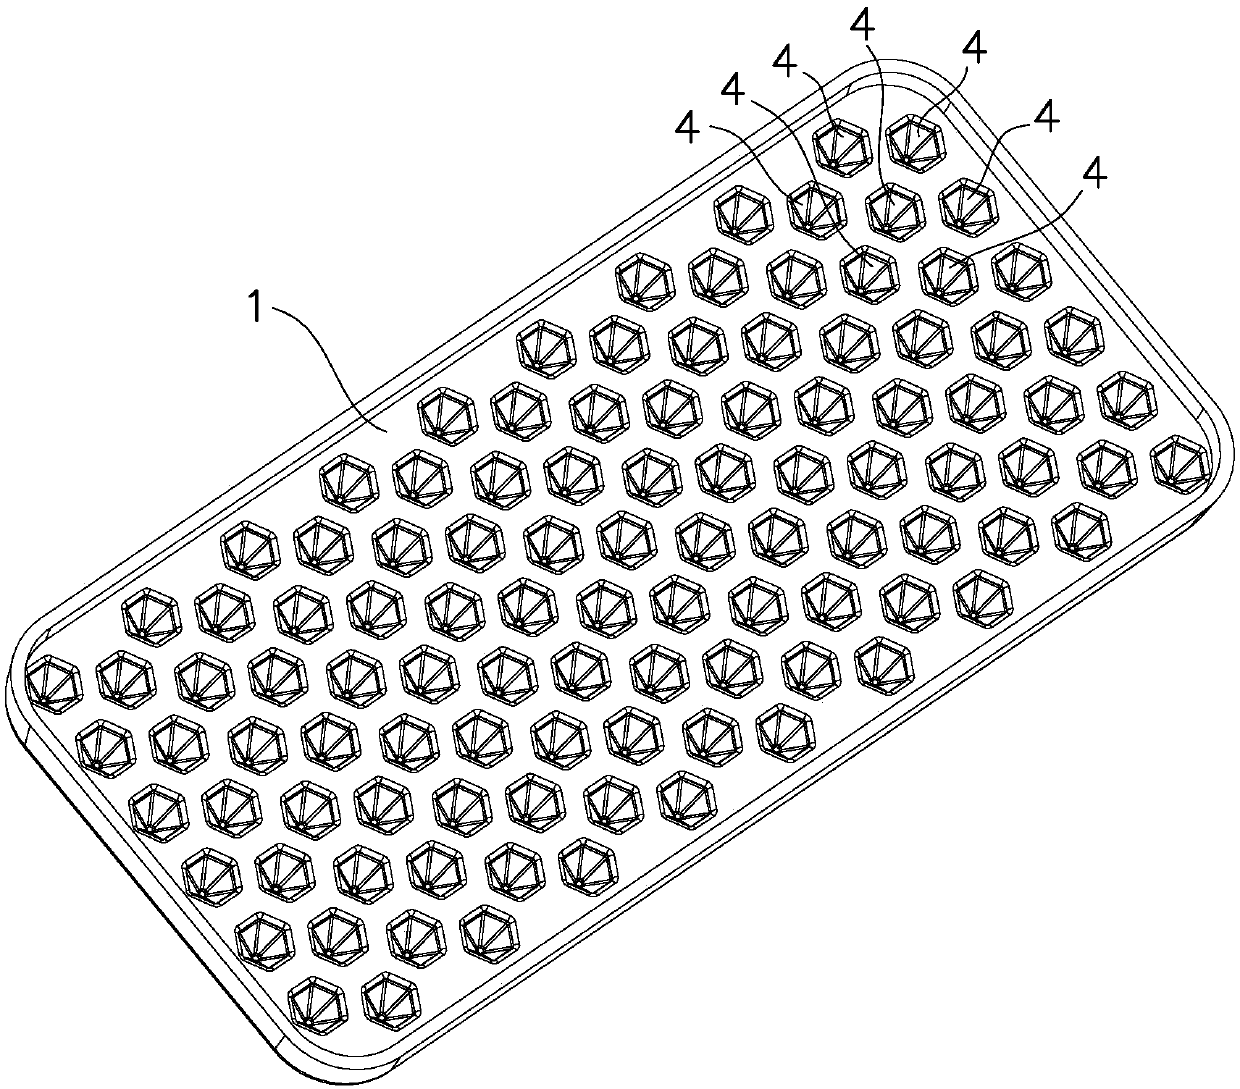 Blow molding plate structure